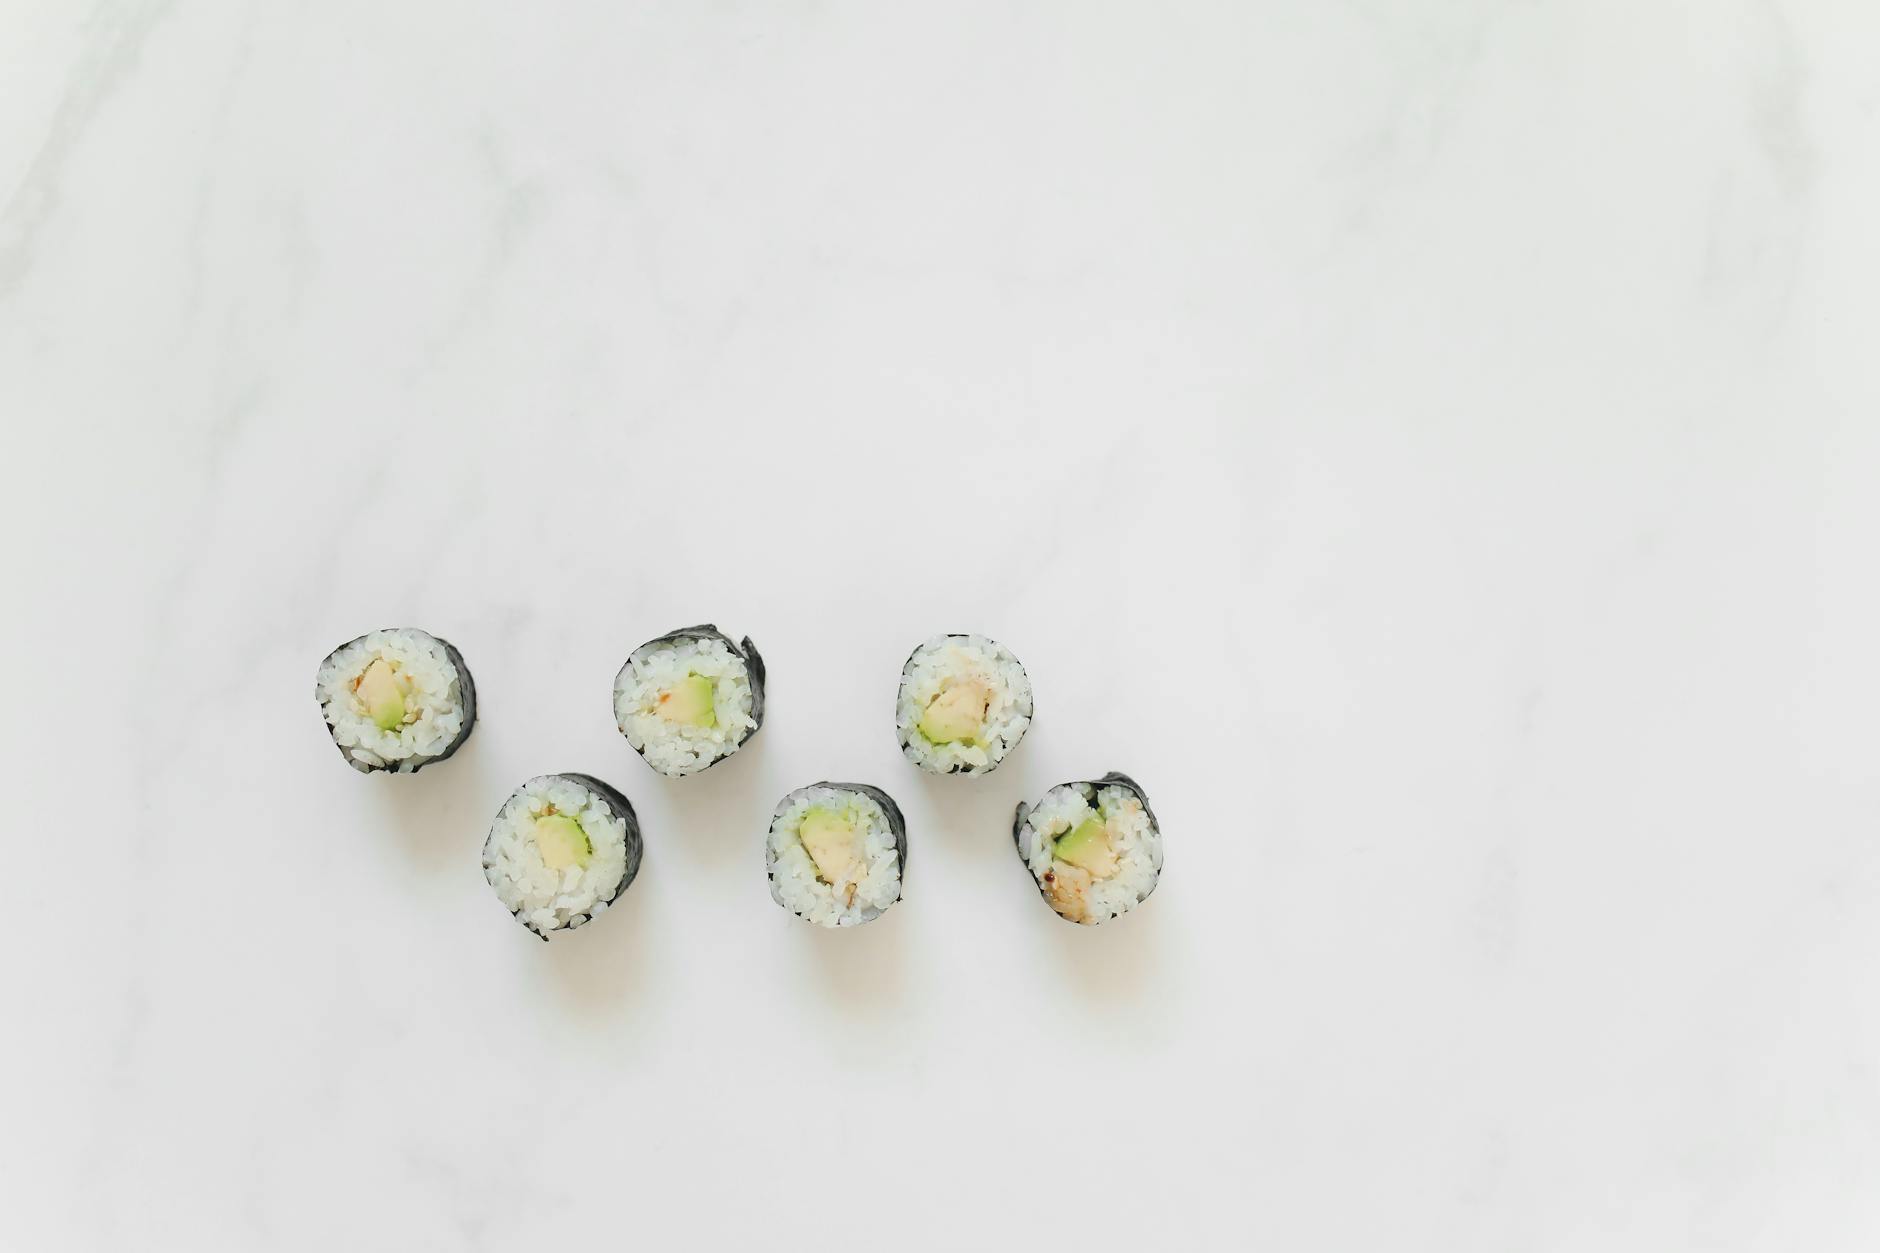 Sushi Rolls on a Marble Counter